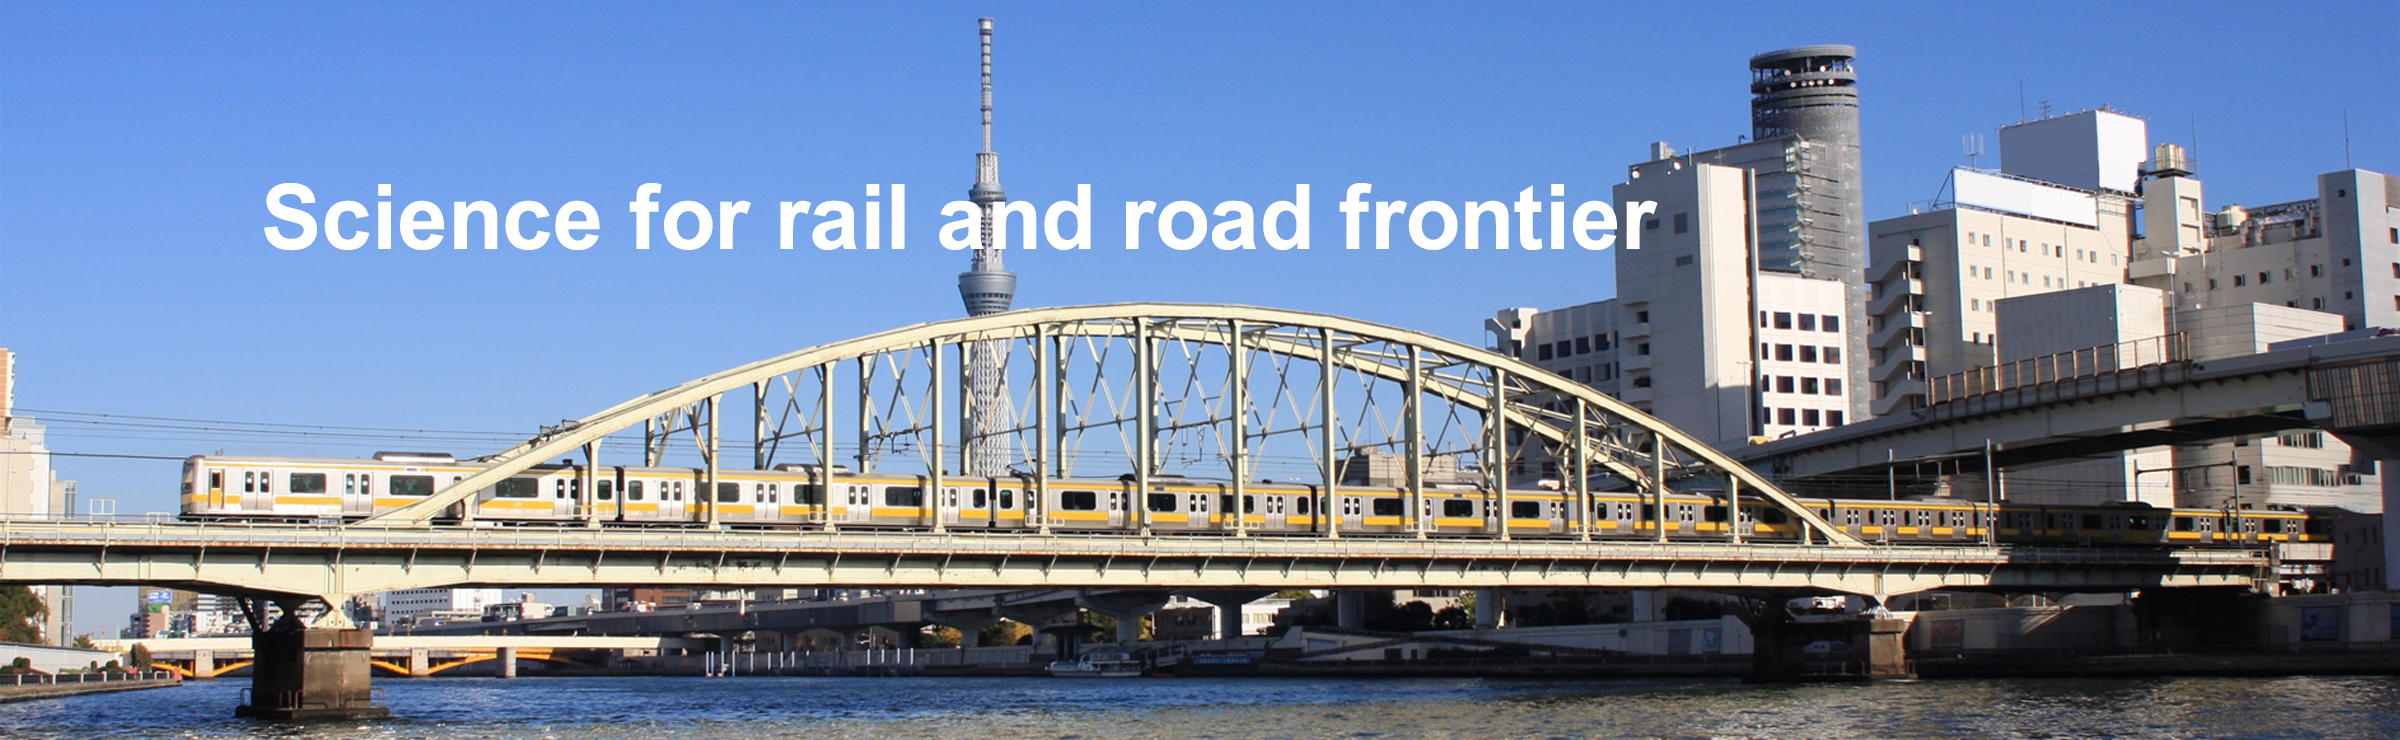 Science for rail and road frontier